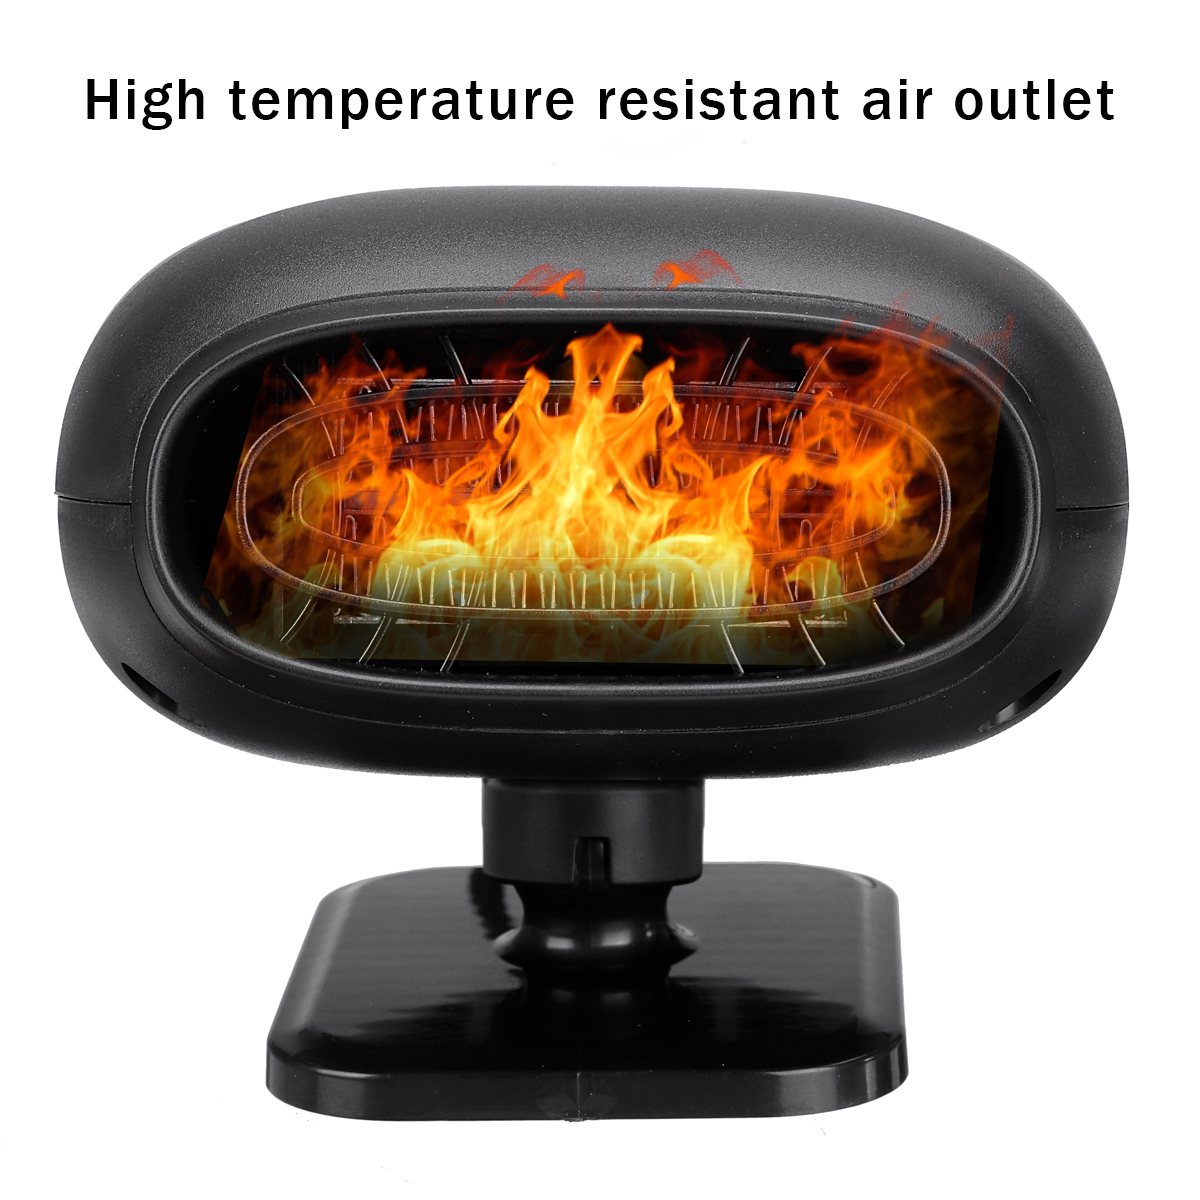 3-IN-1-12V24V-Portable-Vehicle-Heater-360deg-Rotating-Car-Auto-Electric-Heater-Heating-Cooling-Fan-D-1809957-3